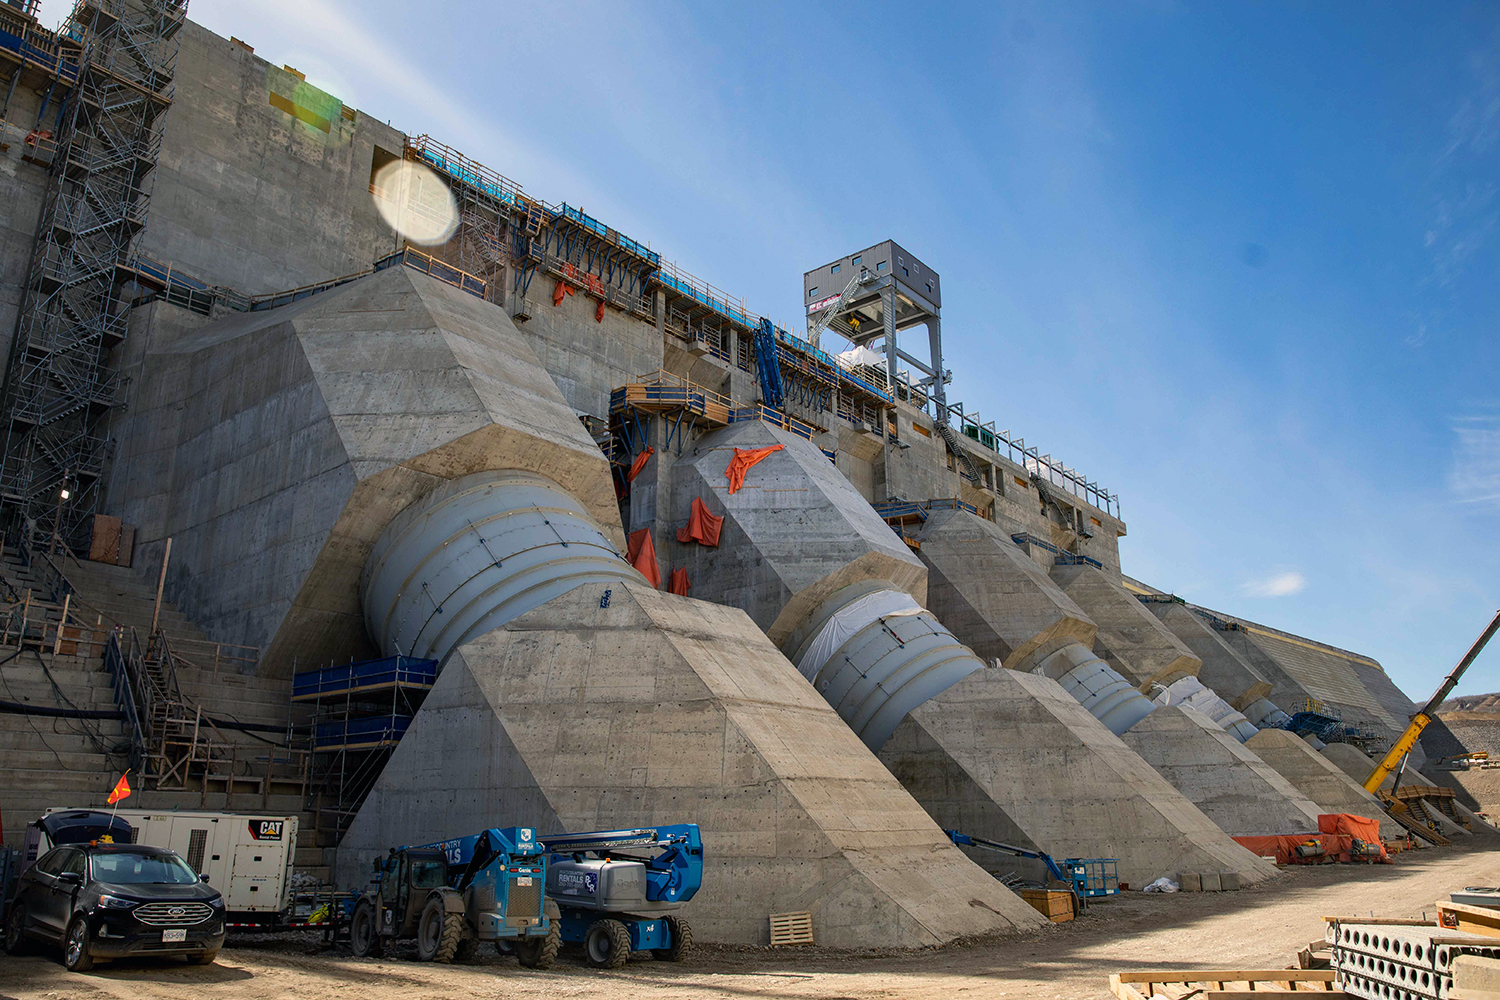 Site C: Penstocks that will carry water into the powerhouse (Source: https://www.sitecproject.com/)